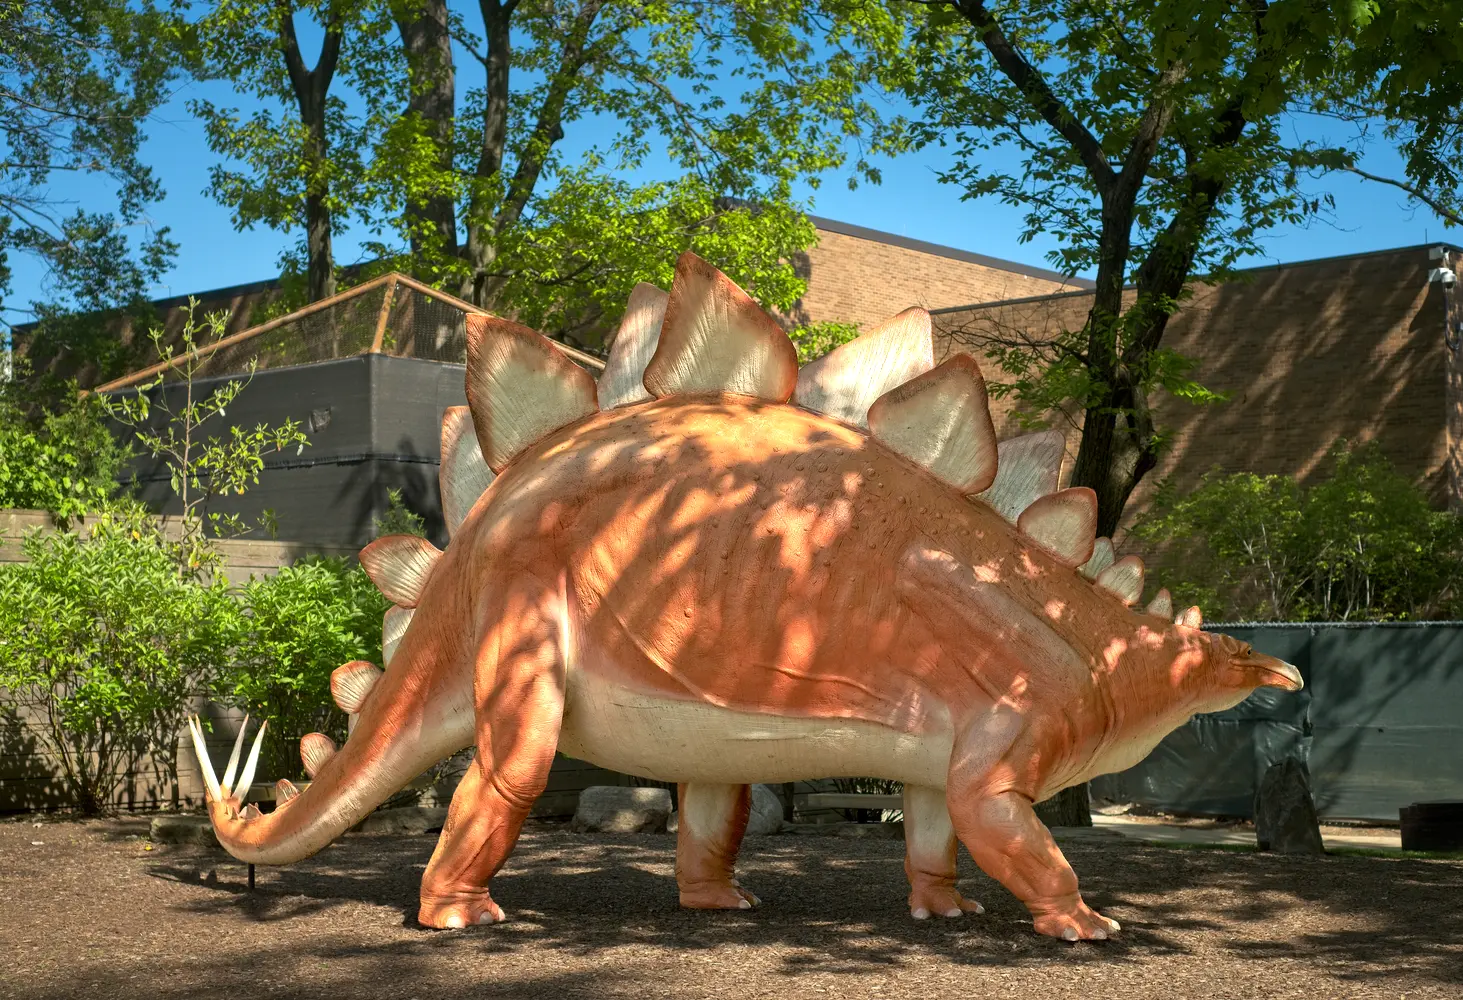 Steggy, the popular full-scale stegasaurus model outside the Cleveland Museum of Natural History